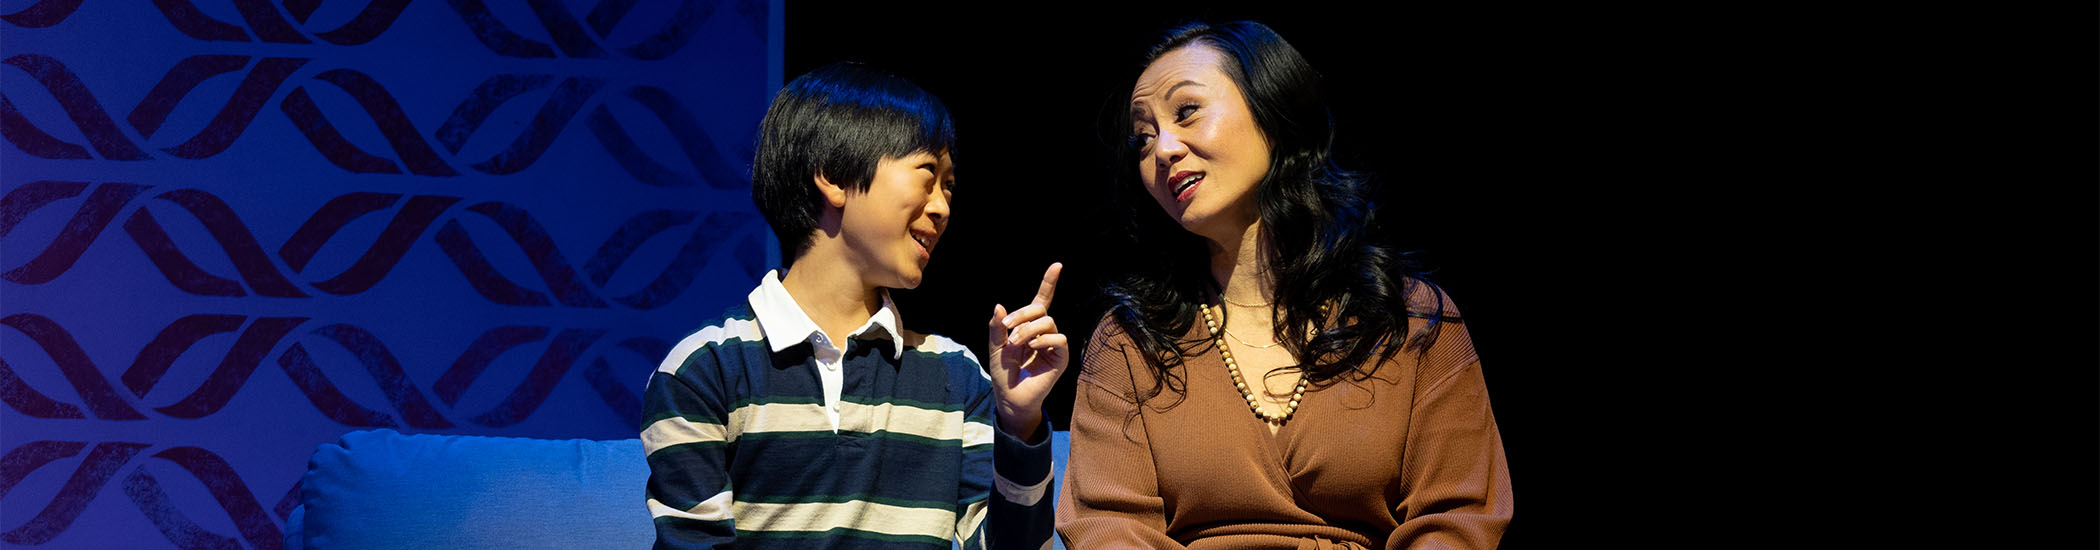 Rickie Wang and Sharon Crandall in Elf: The Musical, 2023: set design by Brian Ball; costume design by Christine Reimer; lighting design by Itai Erdal; photo by Moonrider Productions for the Arts Club Theatre Company